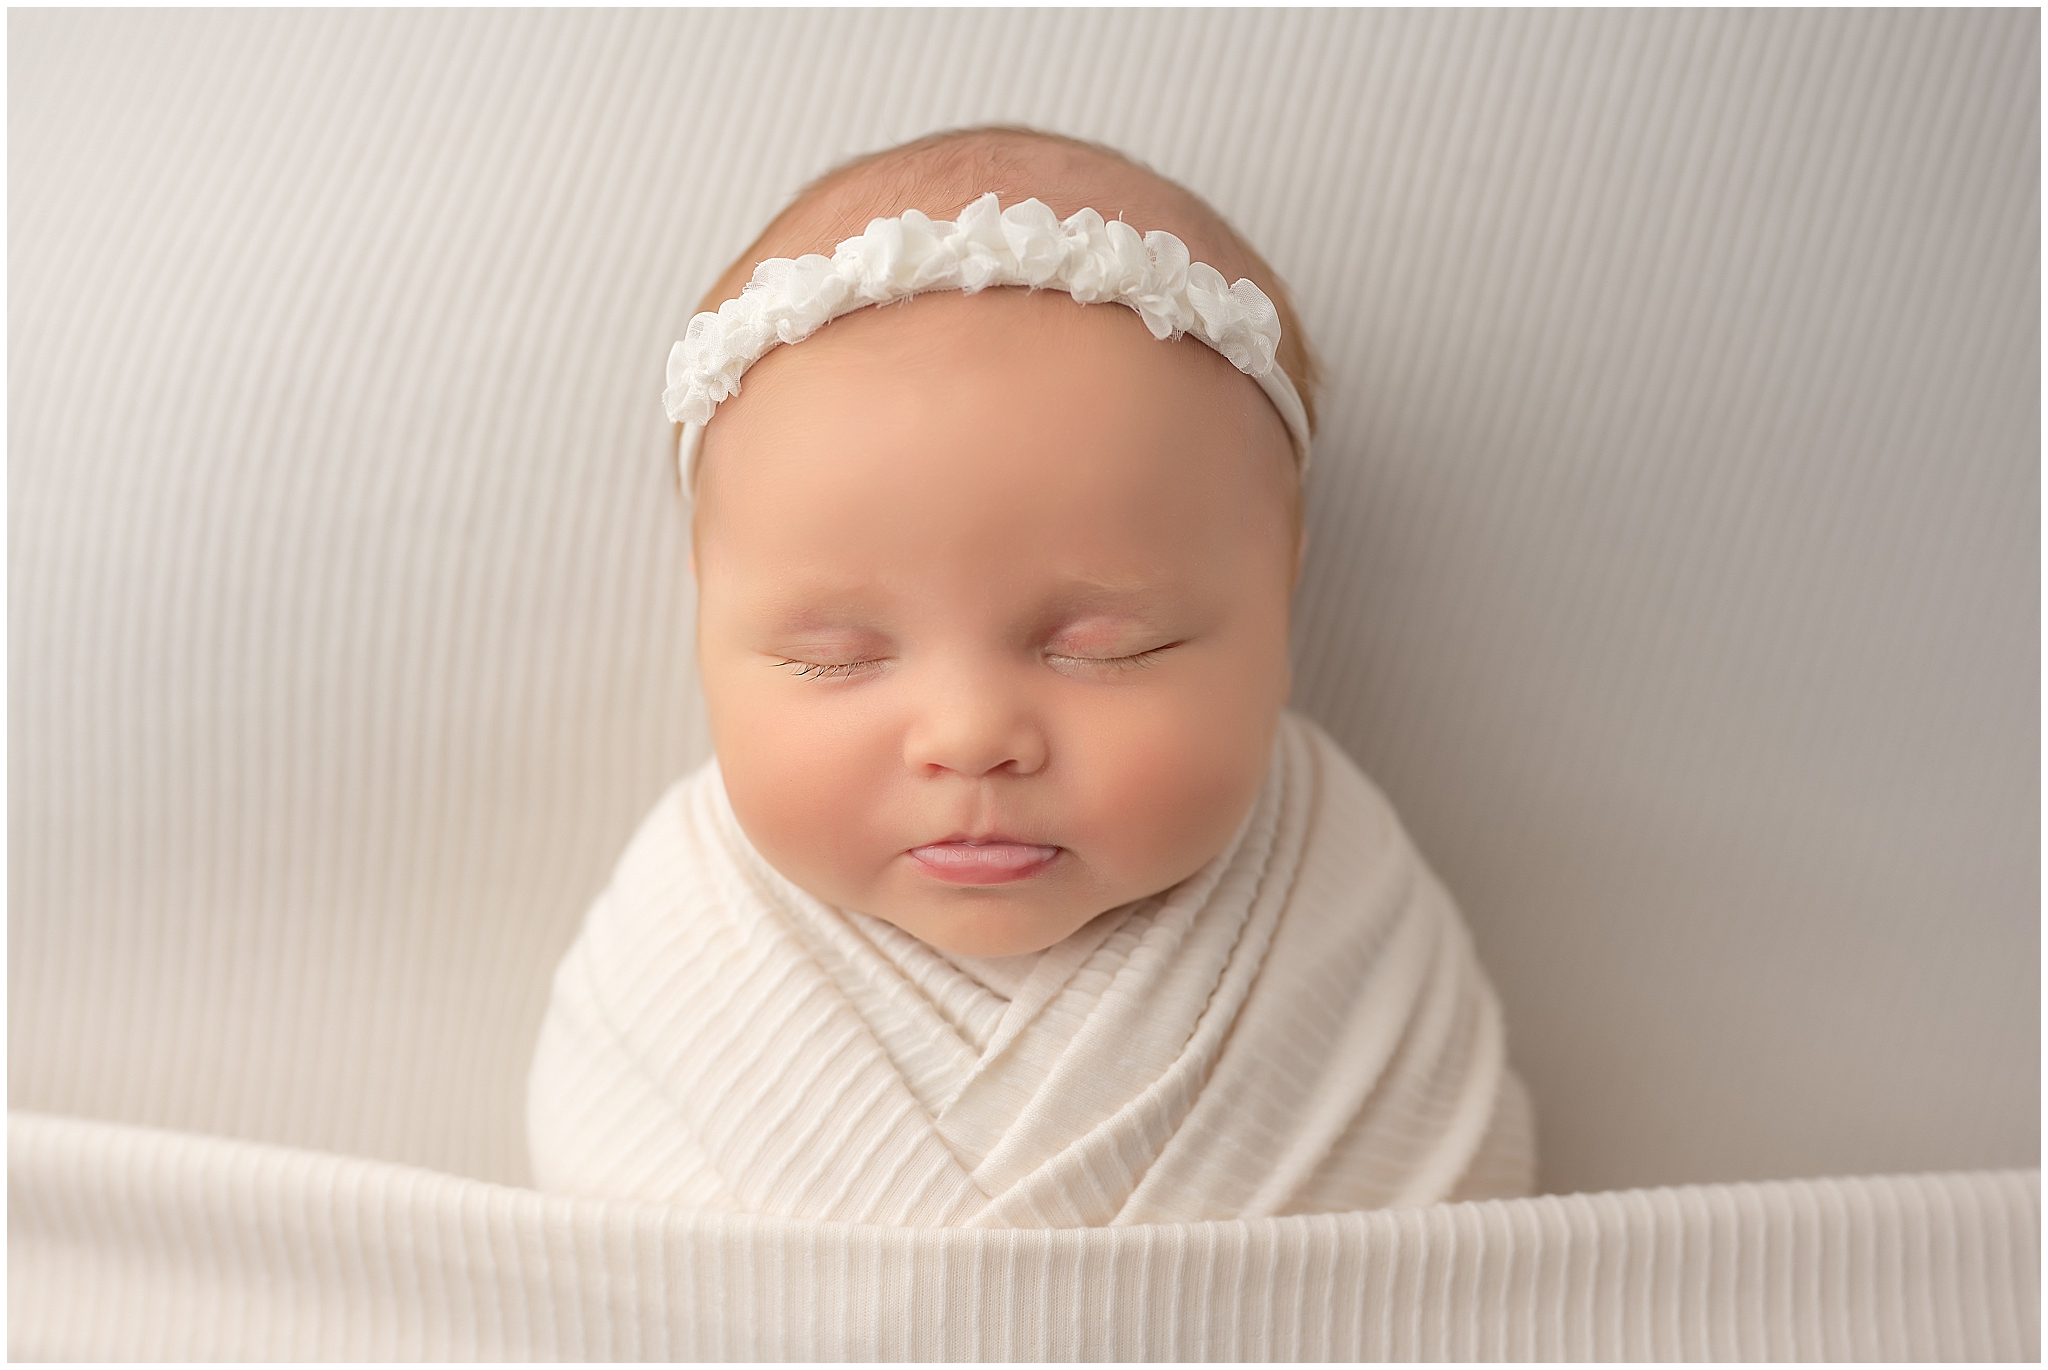 baby girl sleeping during newborn photography session in london ontario